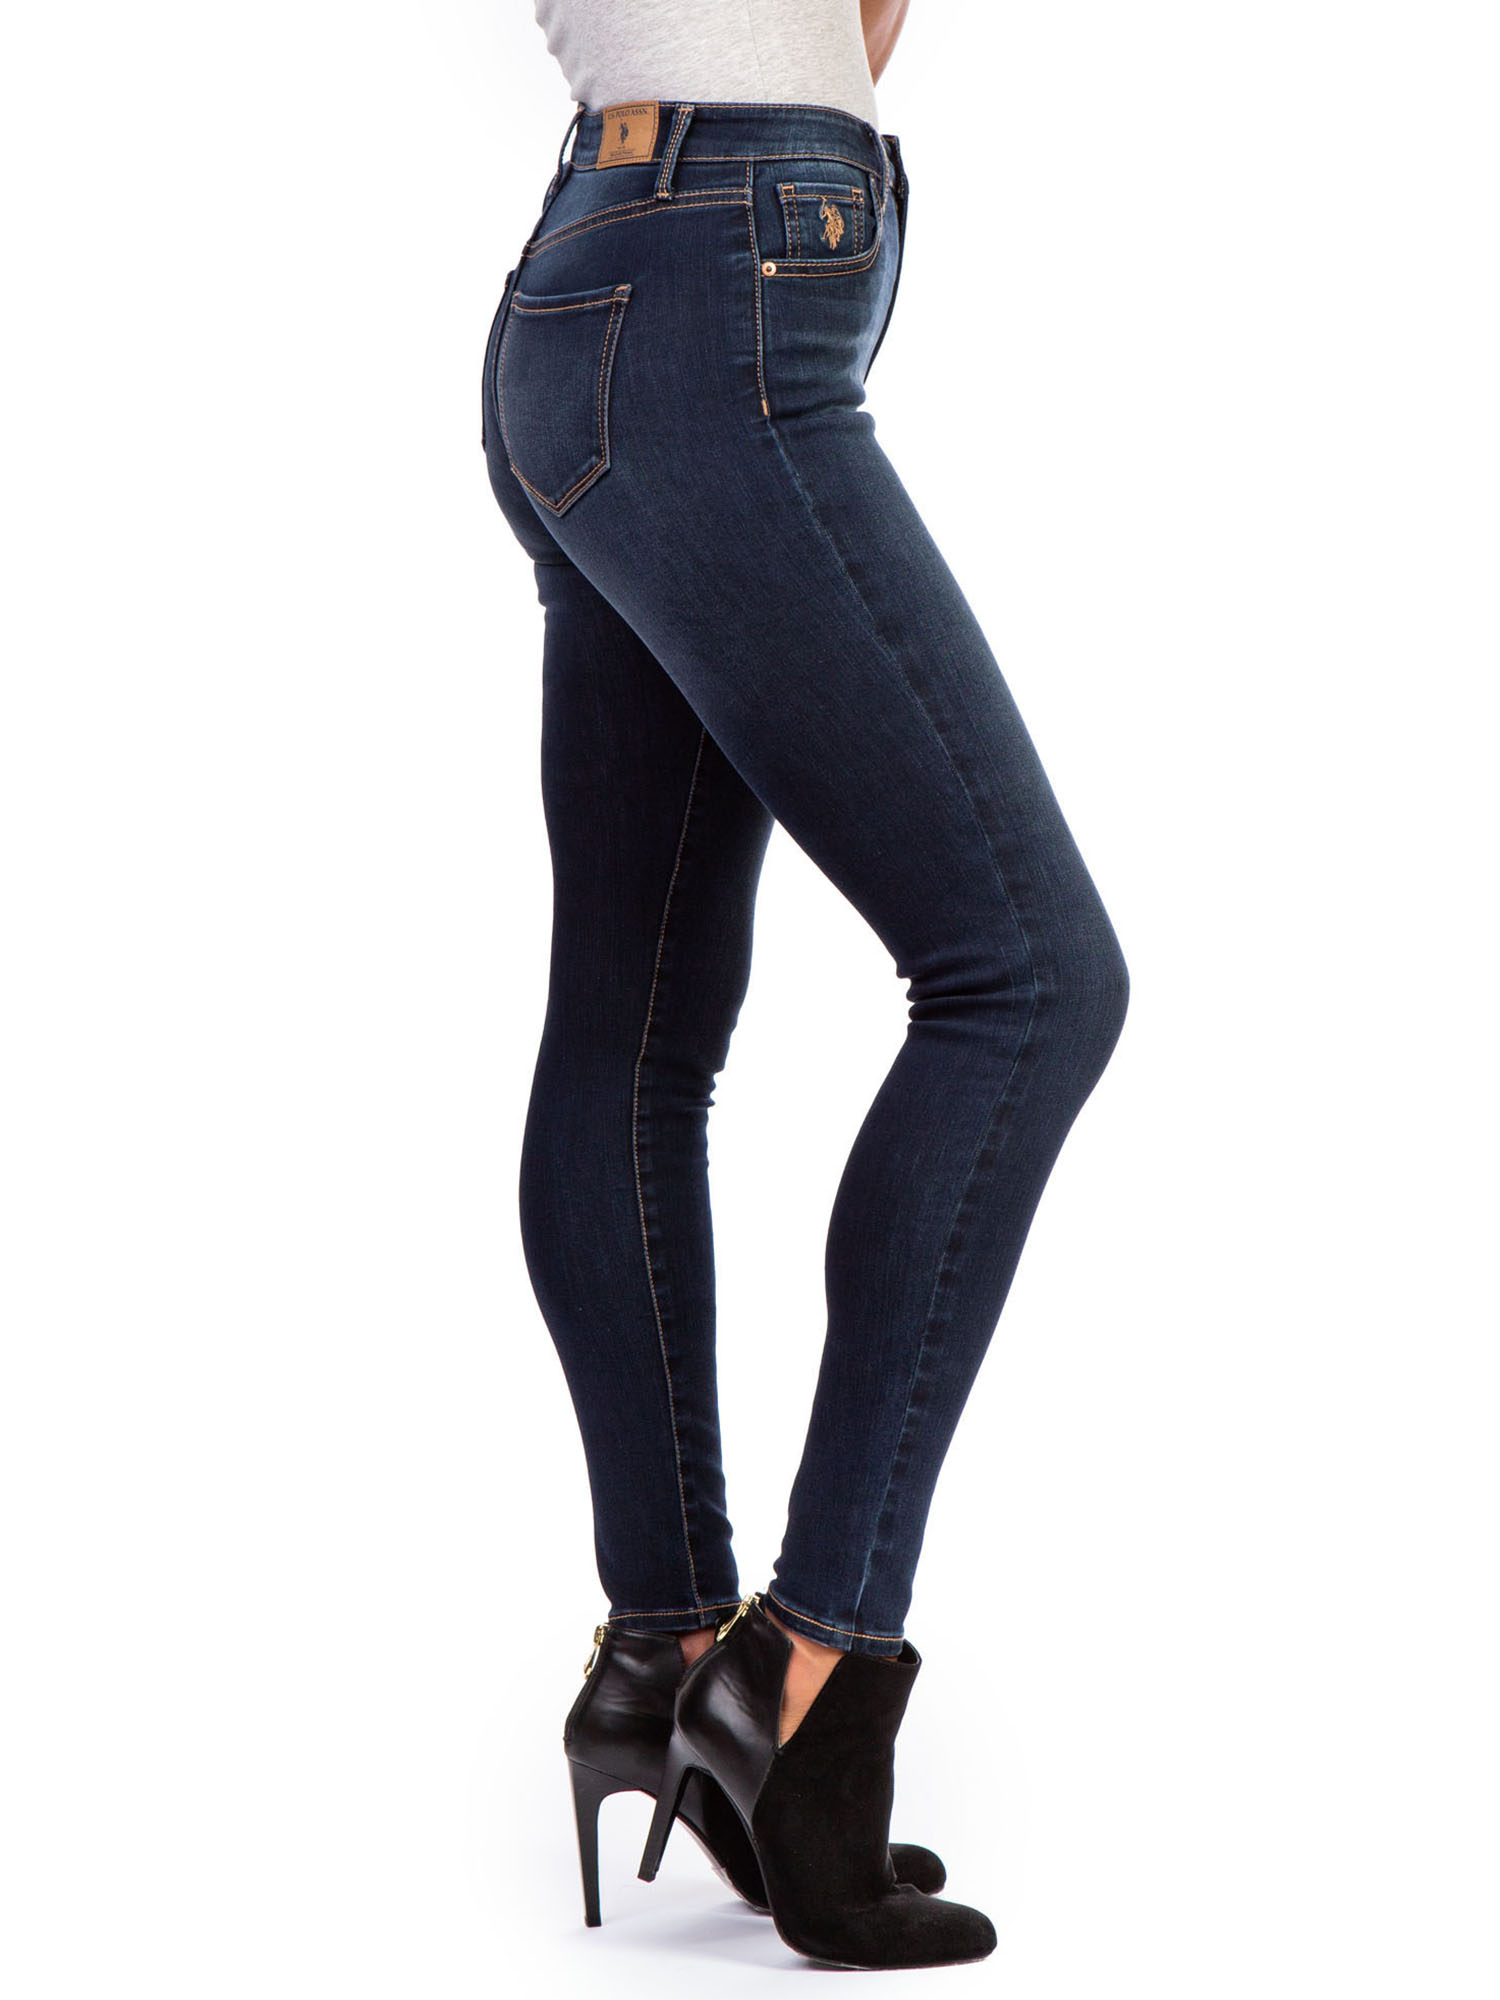 U.S. Polo Assn. High Rise Super Skinny Women's - image 4 of 5